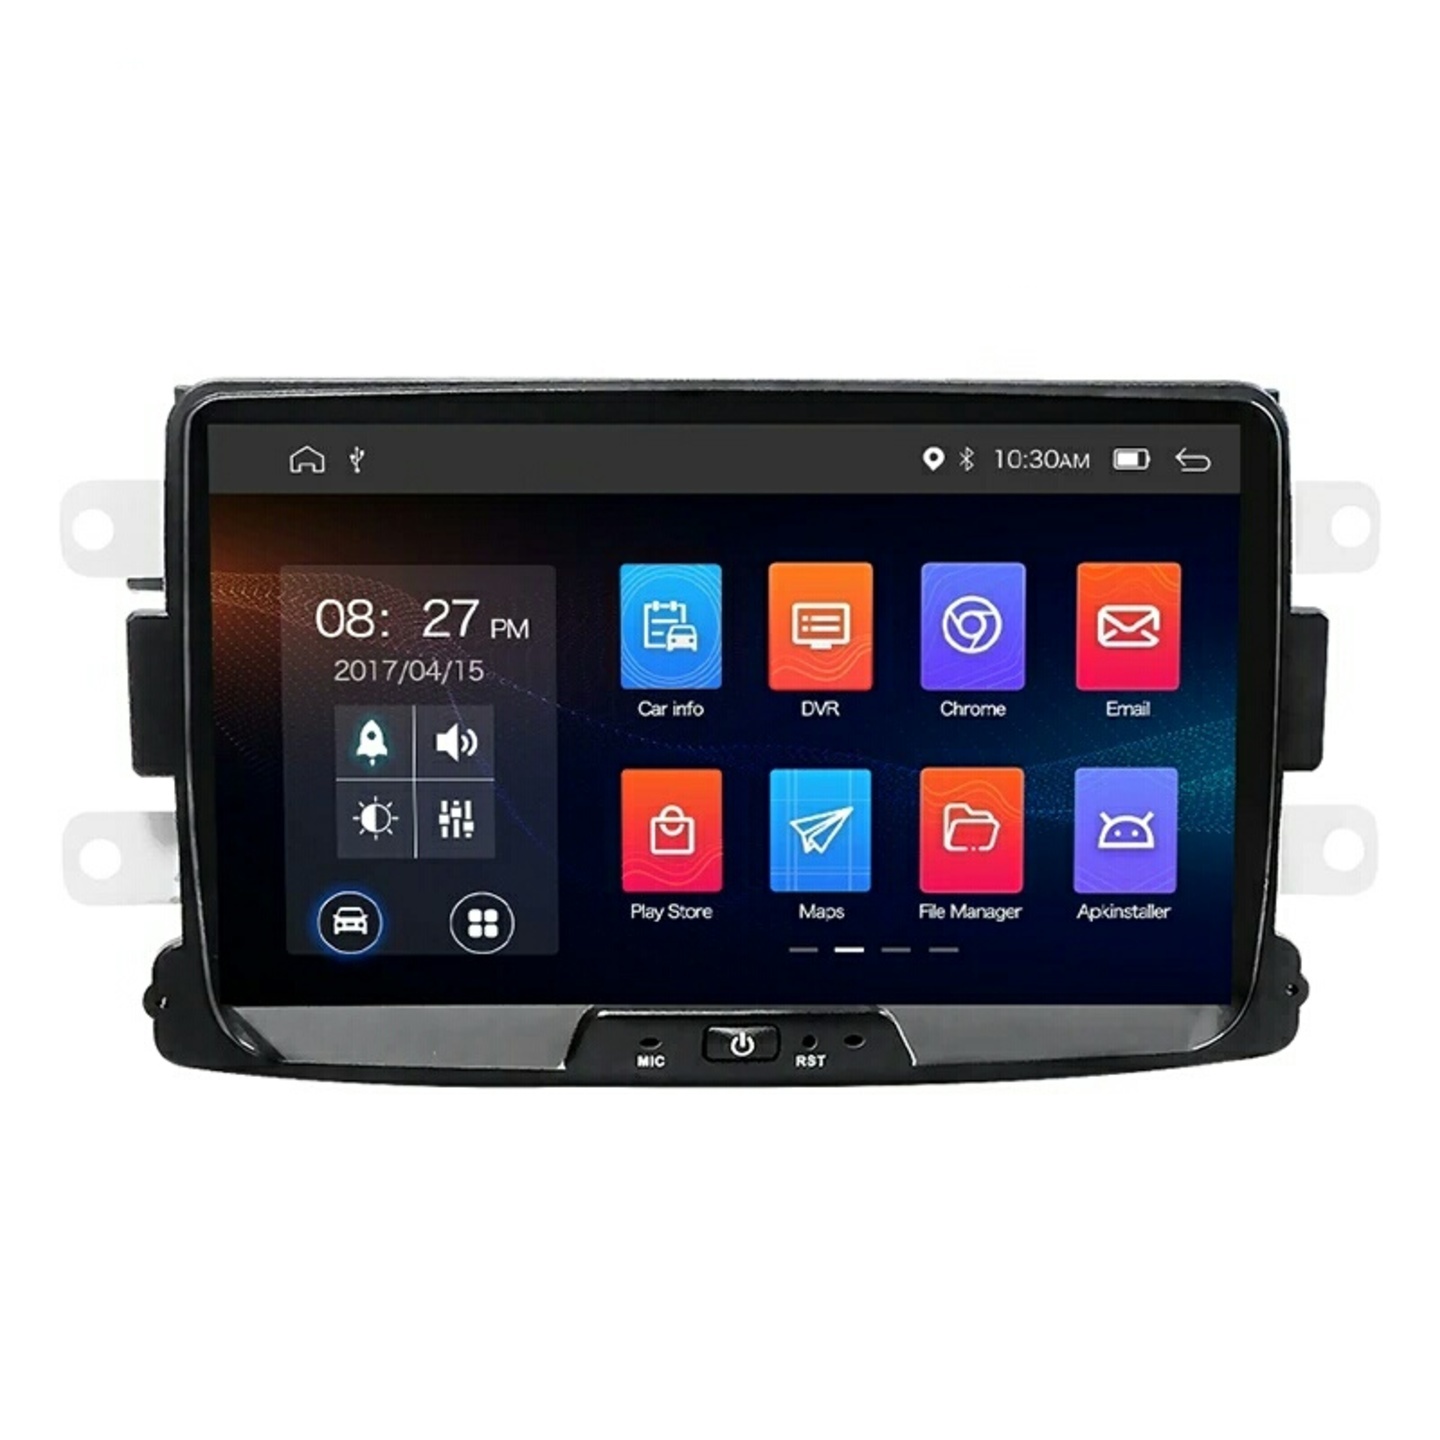 Renault Android infotainment system